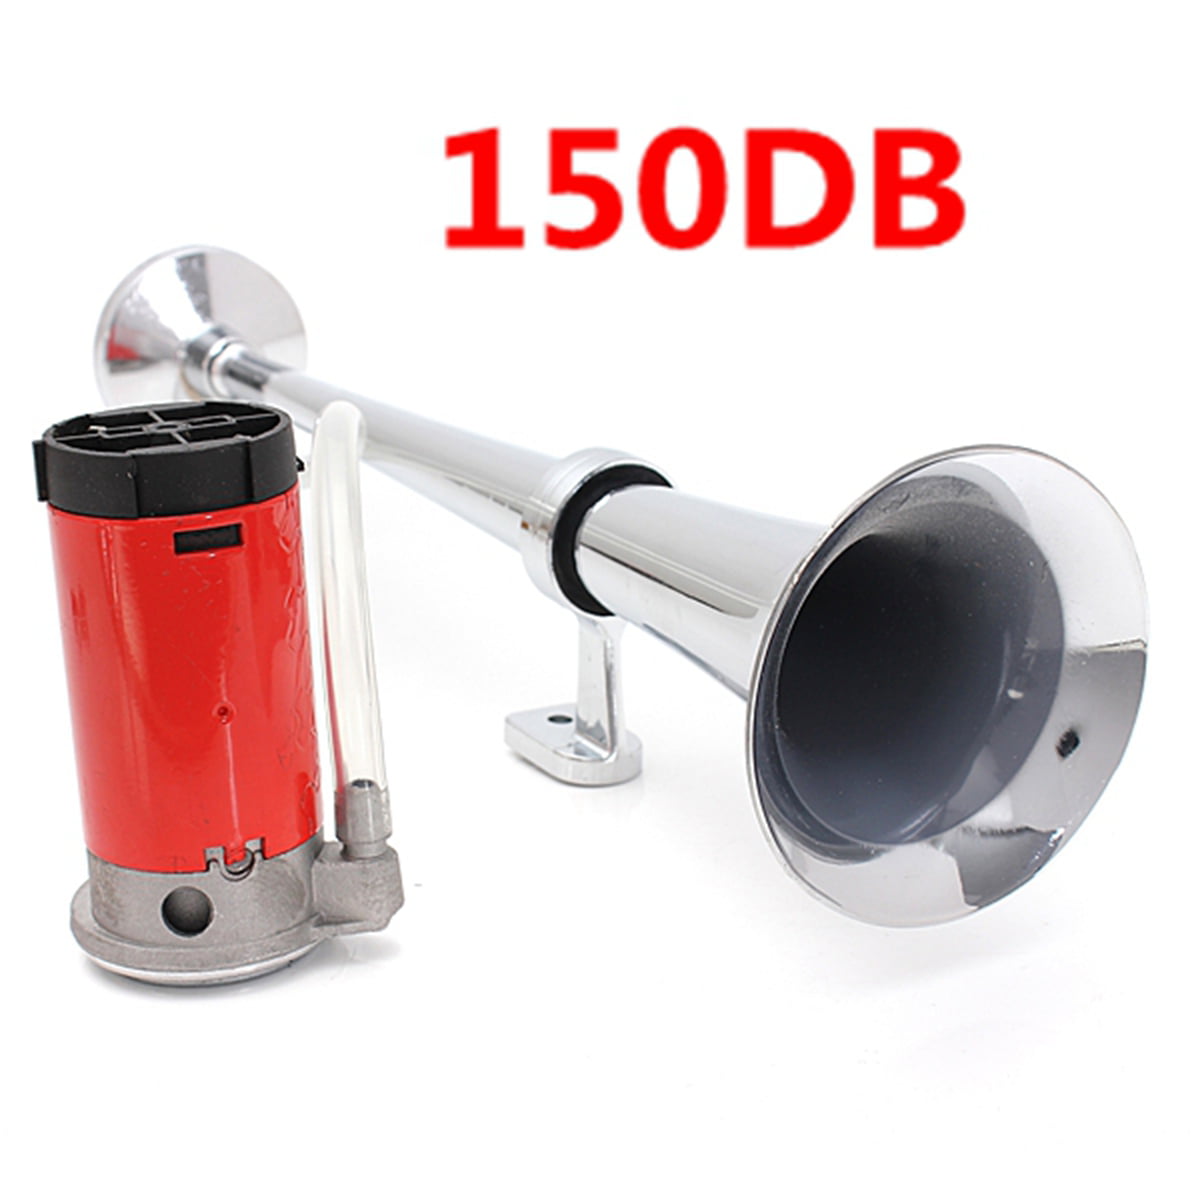 DHUILE Car Horn 12V 150db air horn car speaker 430mm Chrome Zinc Single Trumpet Truck electric horn with Compressor for Any 12V Vehicles Lorrys Trucks Trains Boats Cars